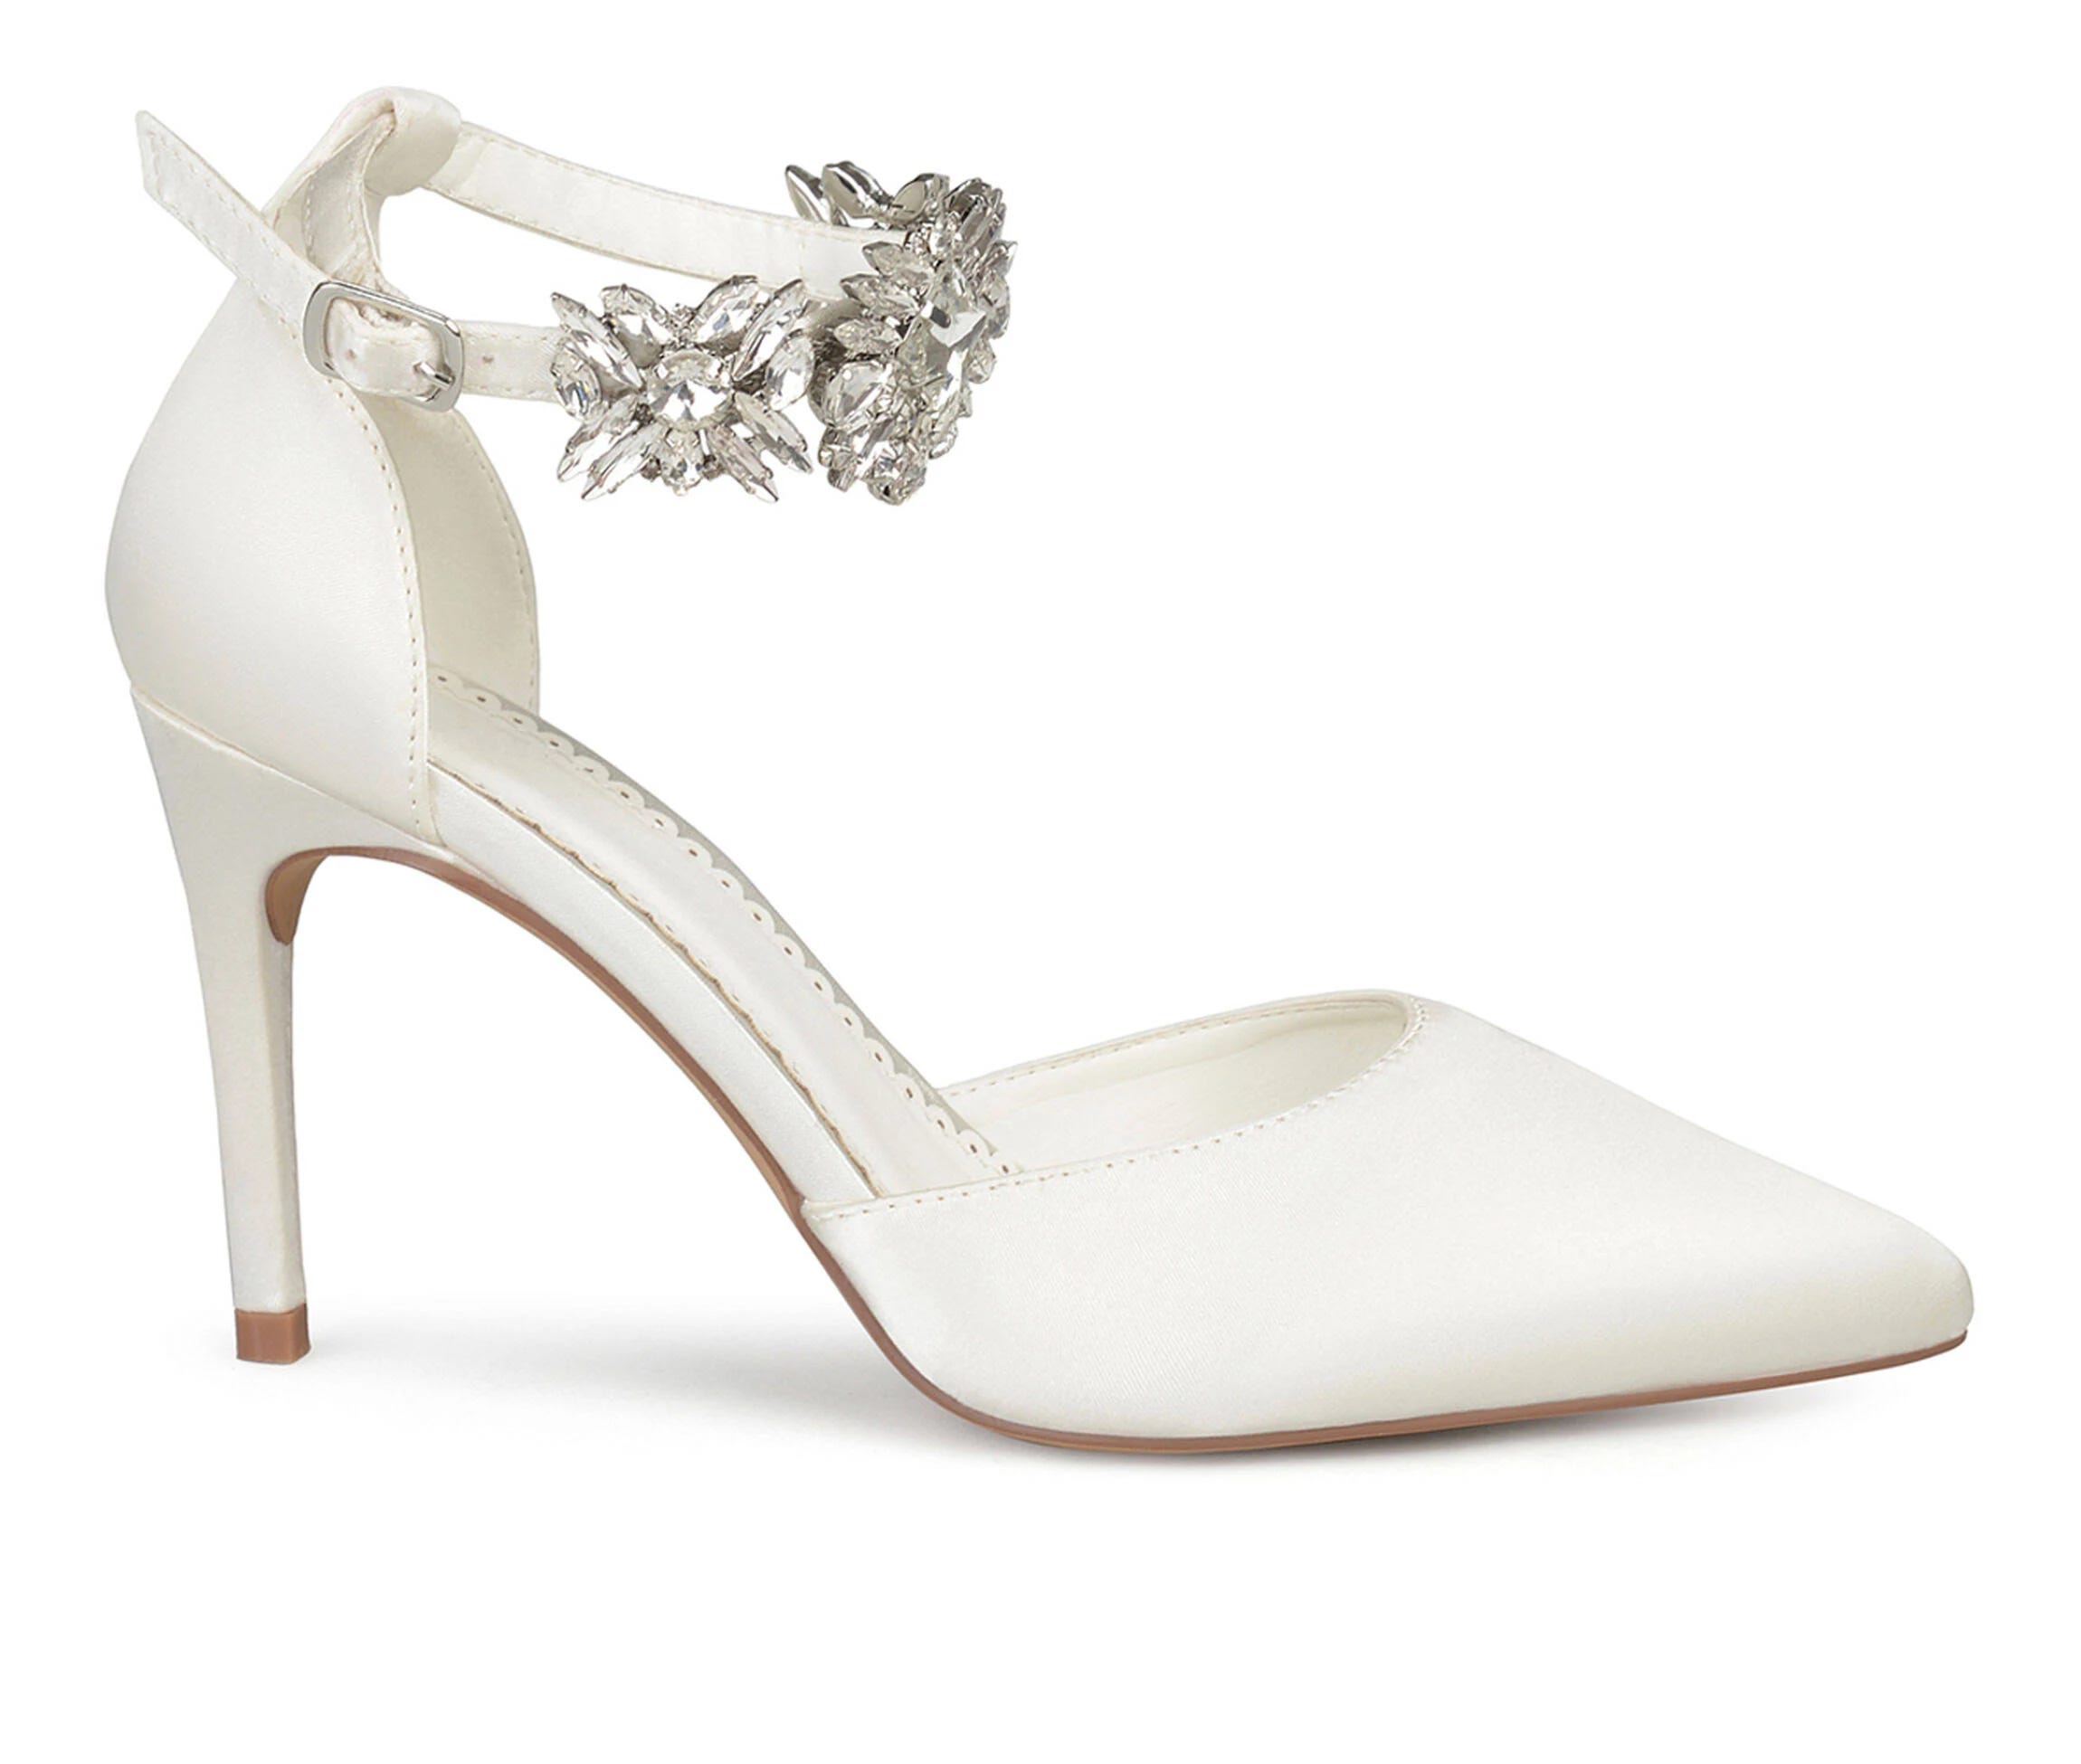 Chic White Stiletto Heels by Journee Collection | Image